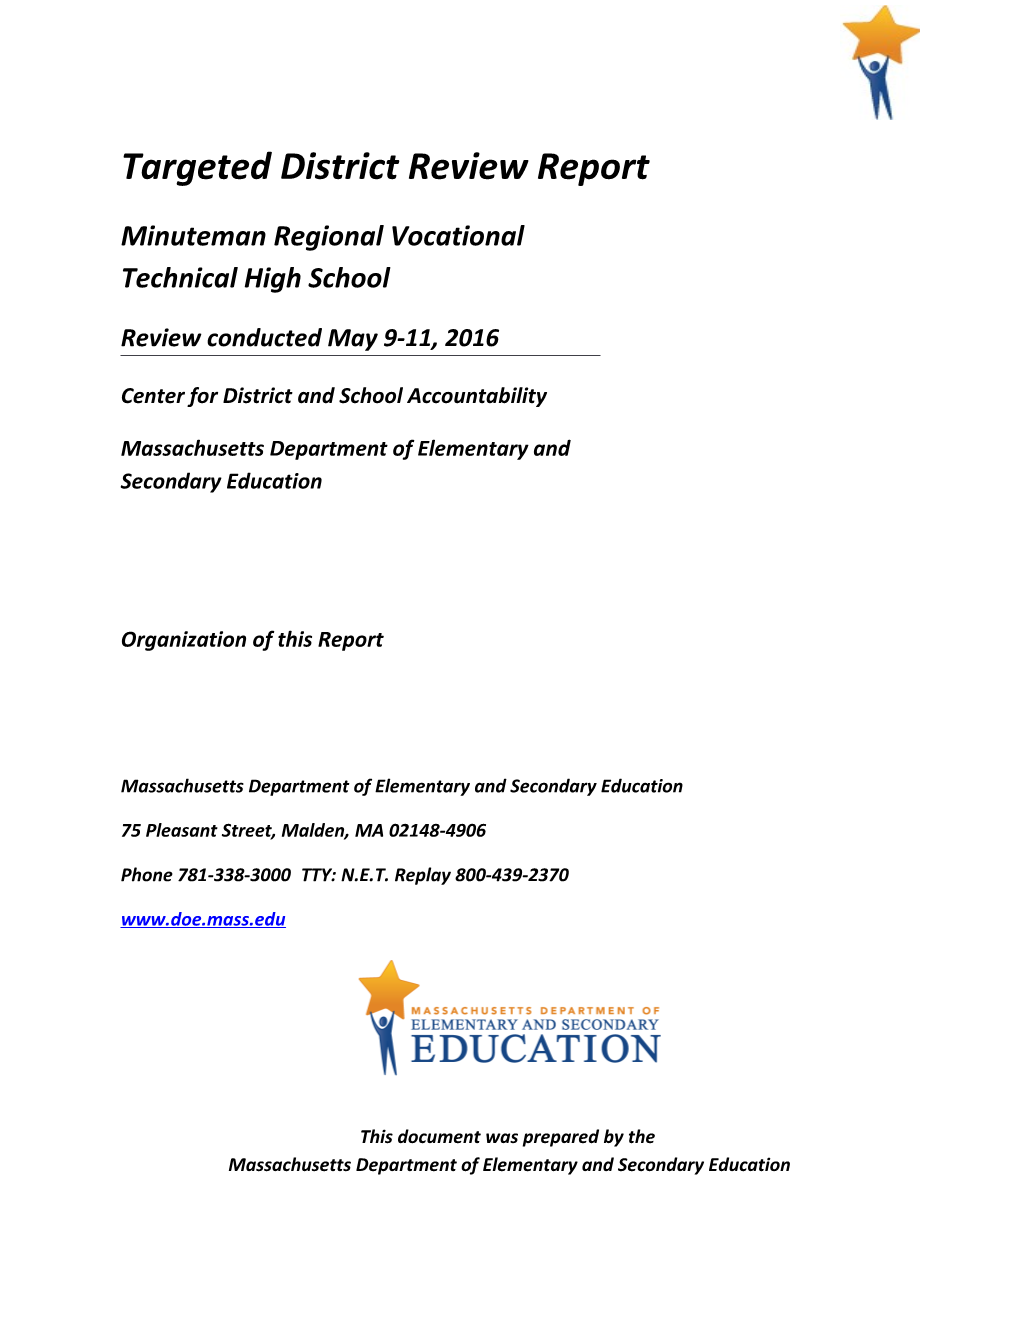 Minuteman District Review Report, 2016 Onsite